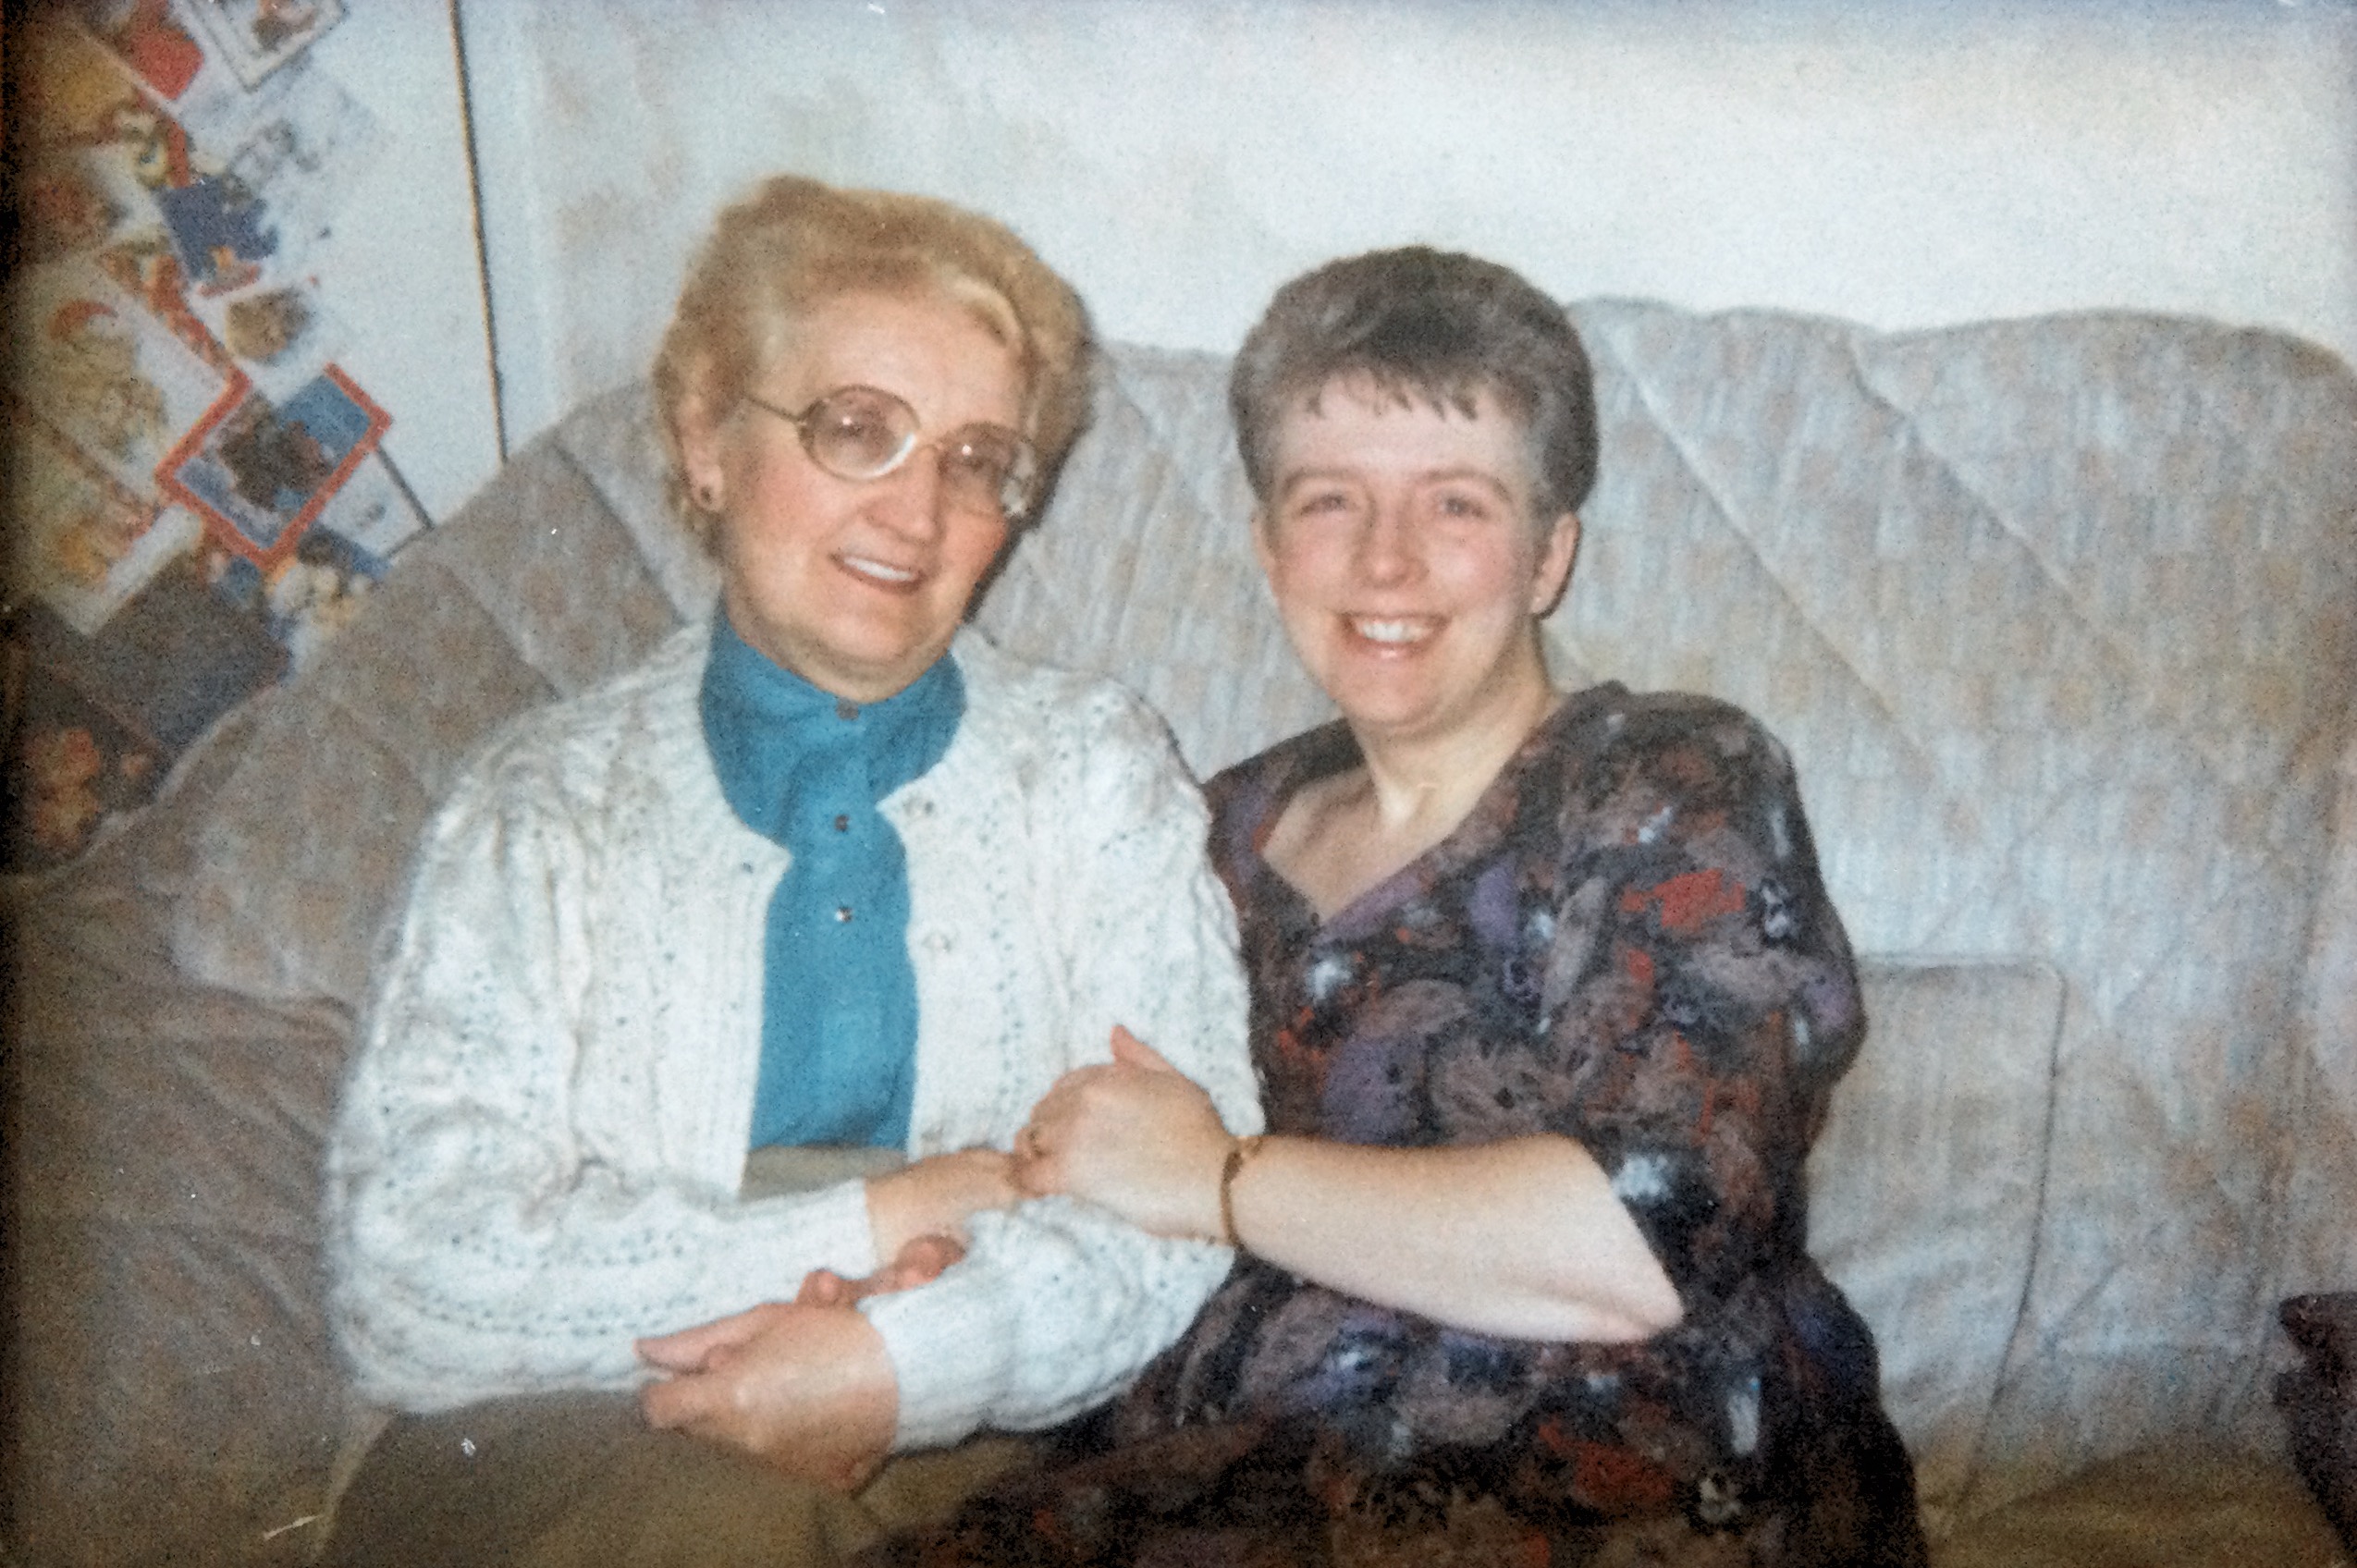 Judith and her mum who passed away in 1994.